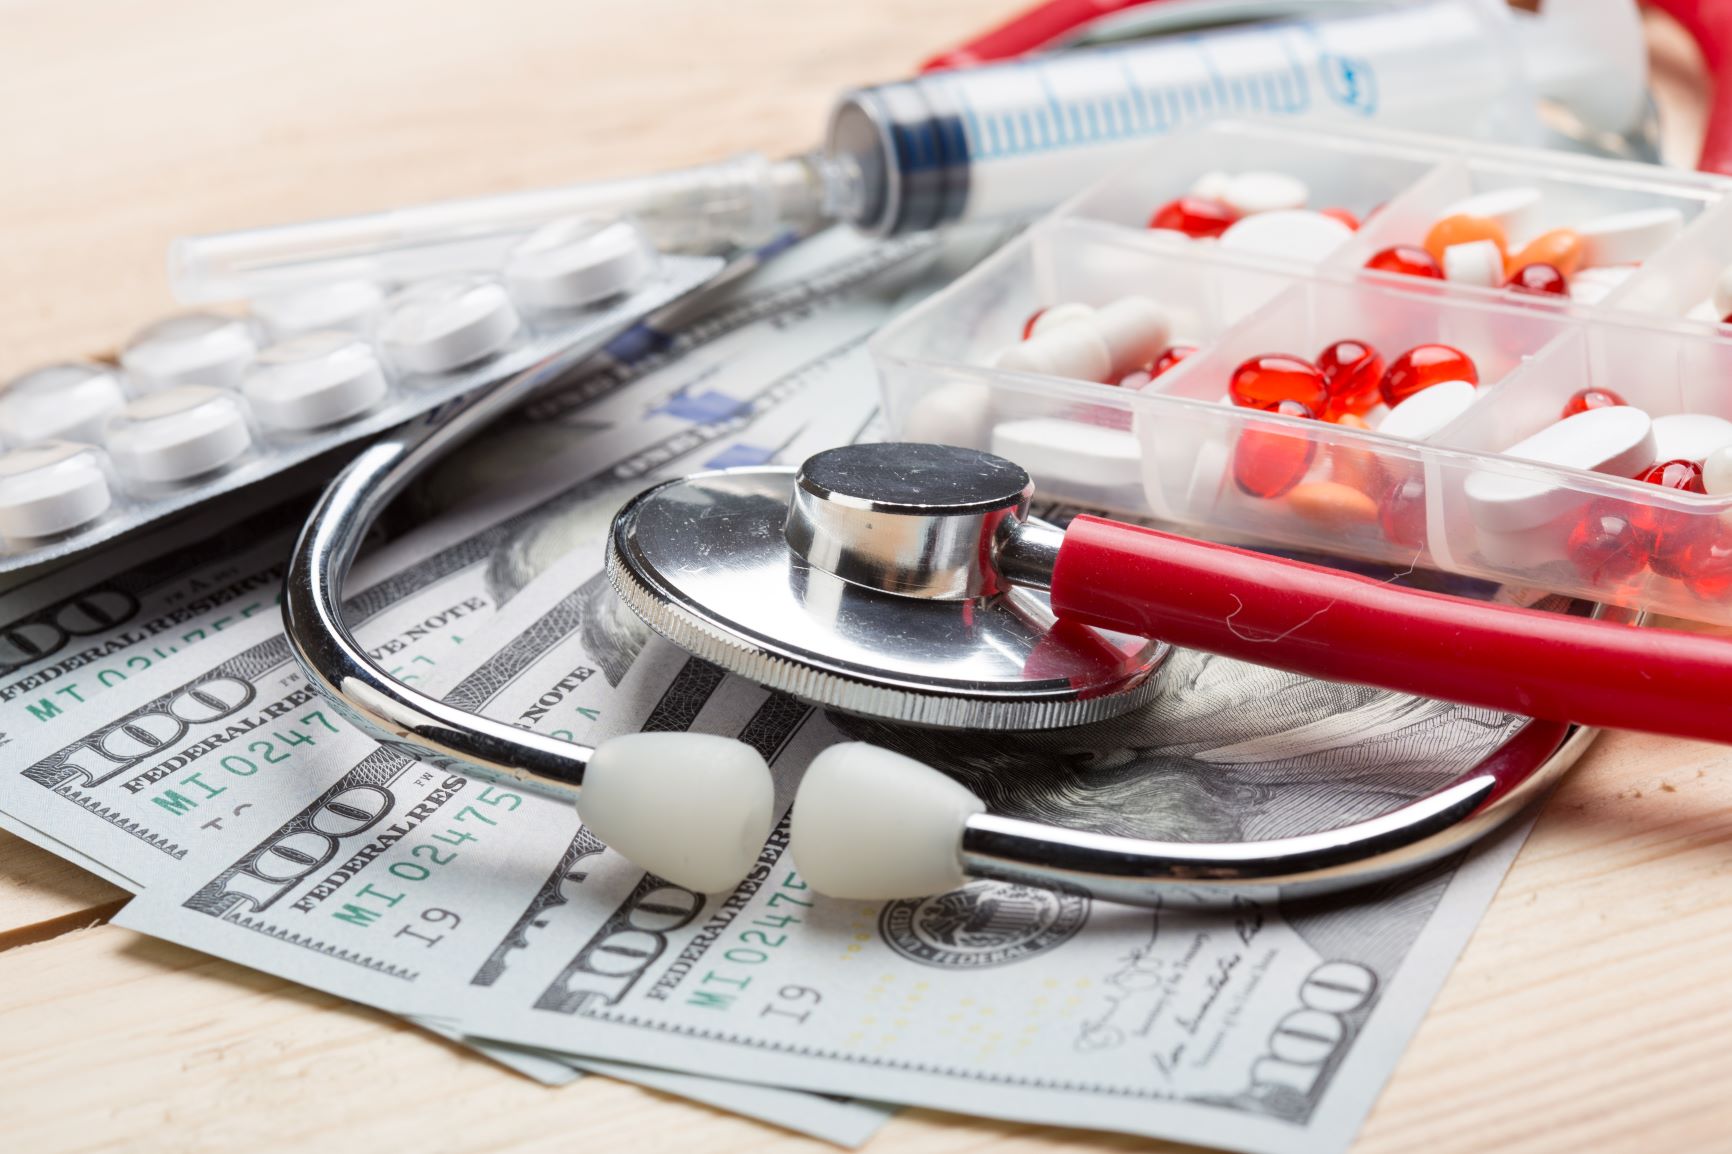 Can I deduct medical expenses on my tax return?